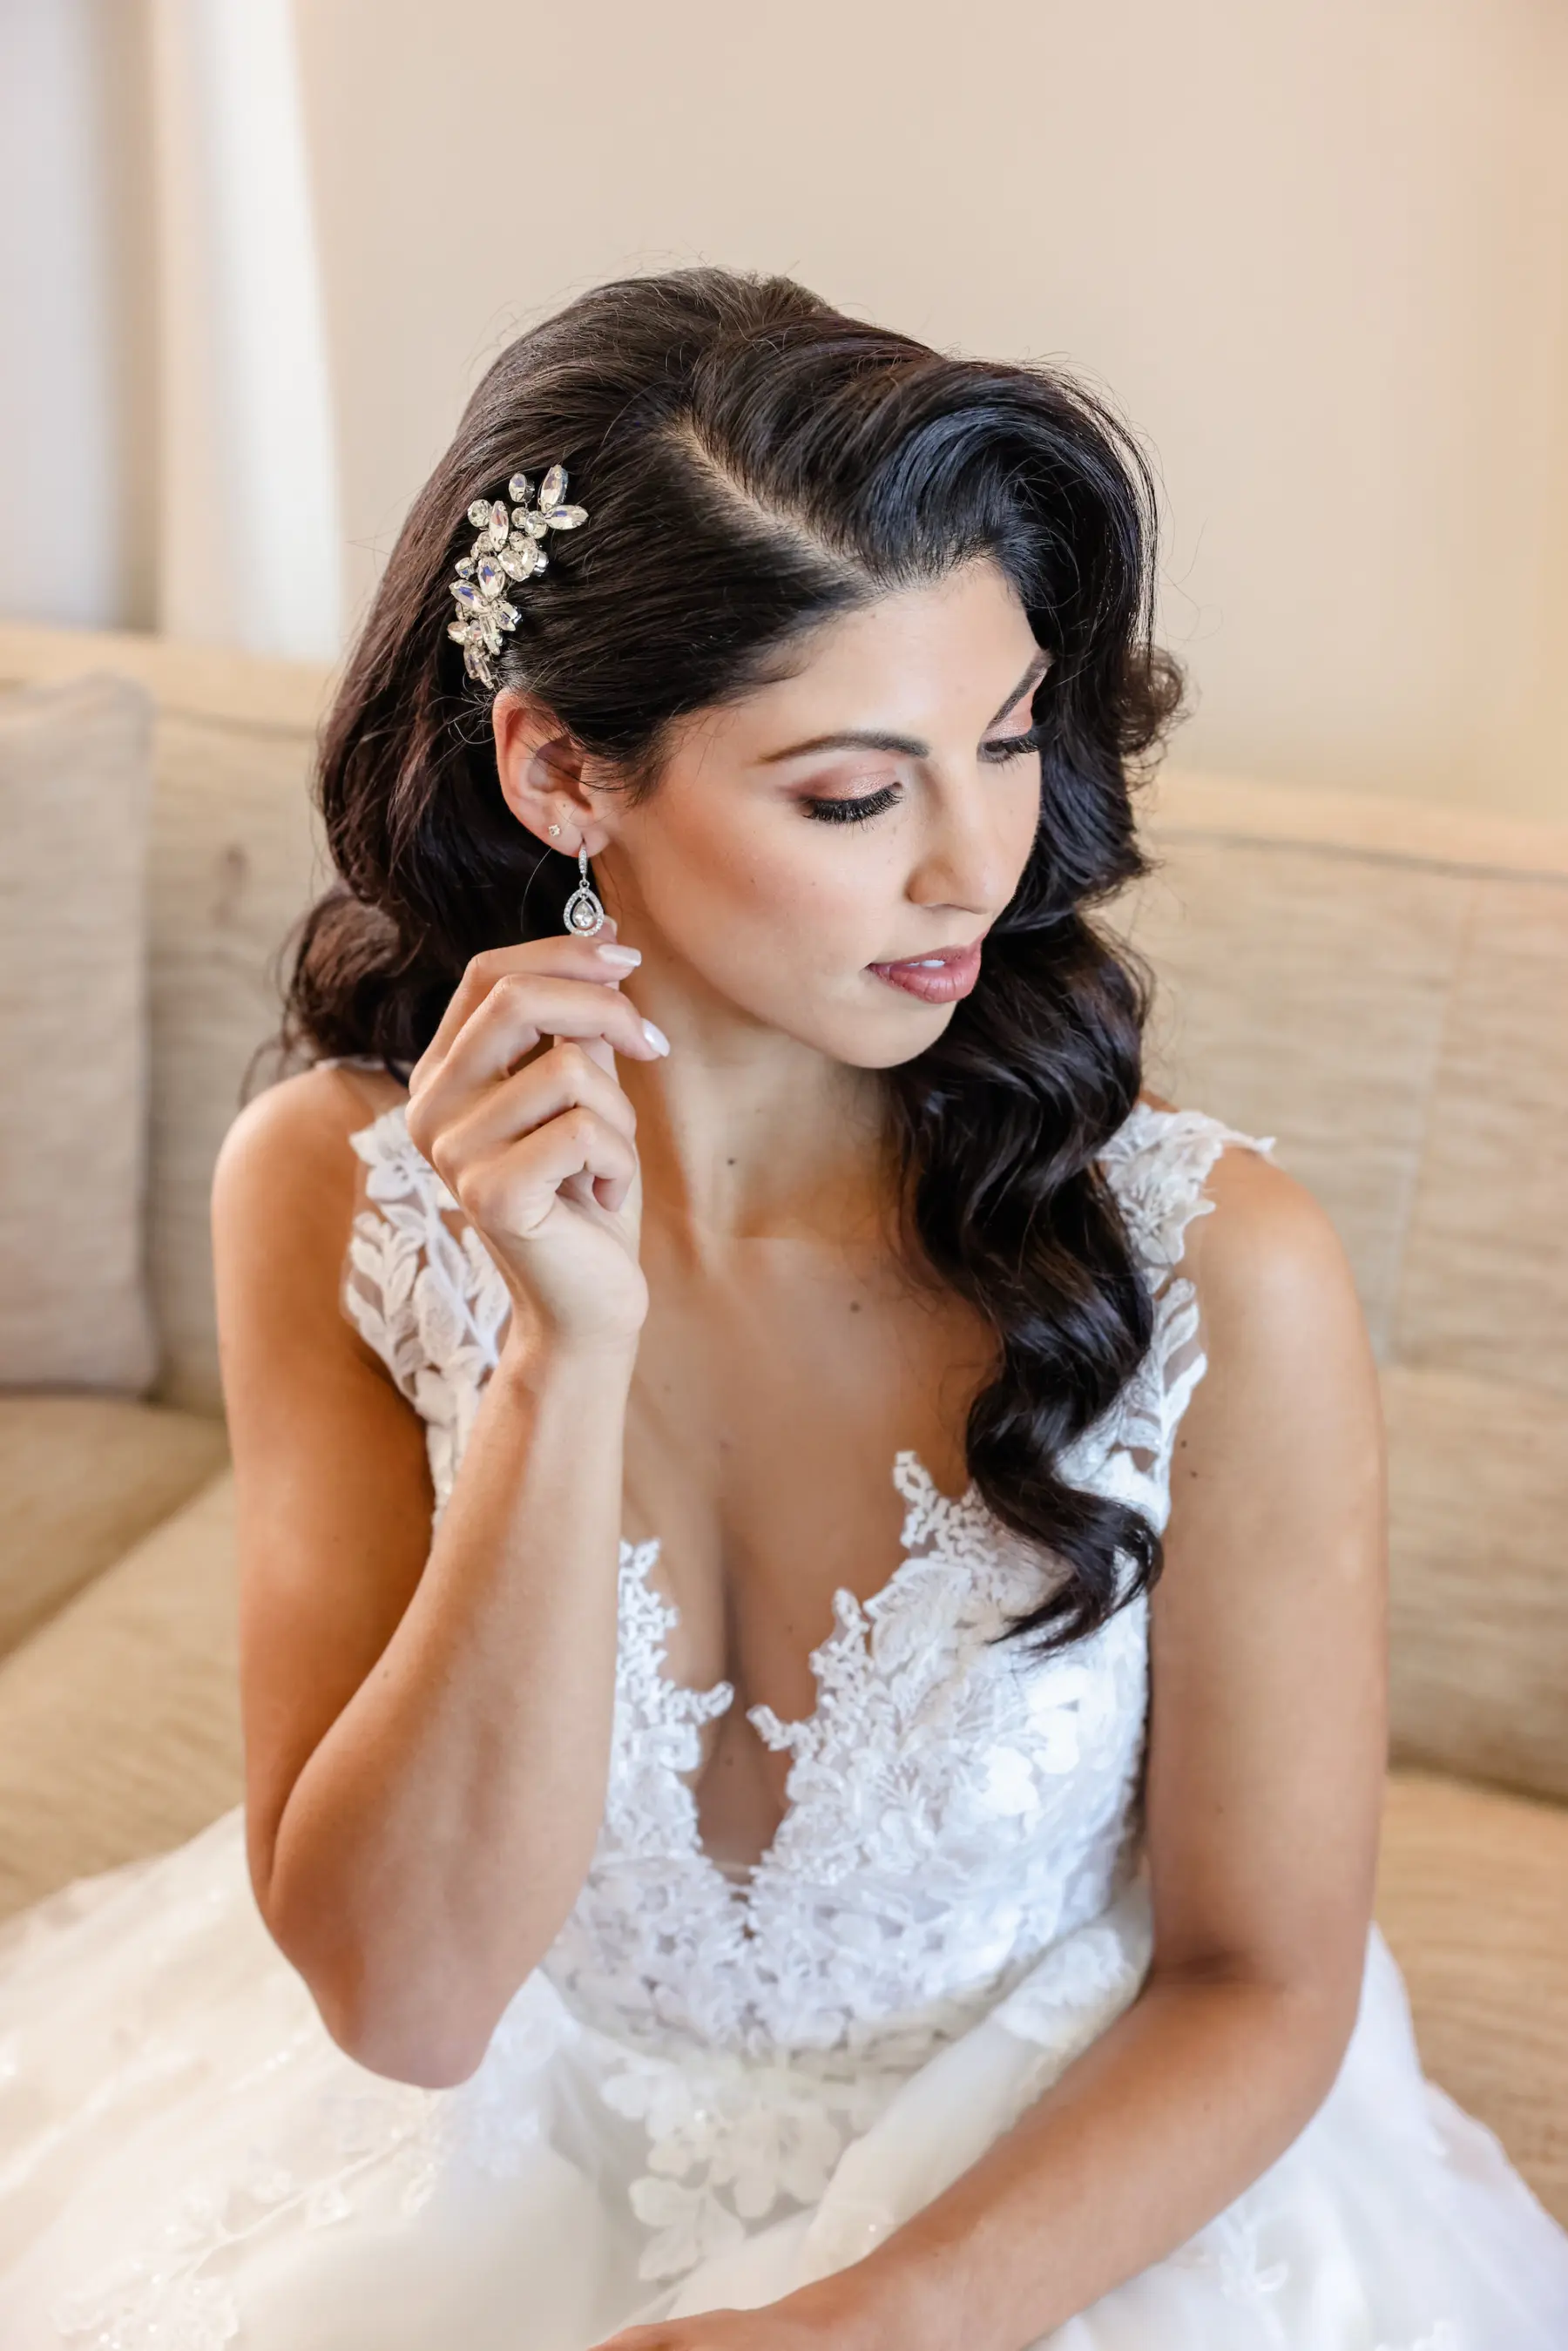 Bridal Hollywood Curl Wedding Hair with Crystal Hairpin and Elegant Makeup Inspiration | Clearwater Hair and Makeup Artist Femme Akoi Beauty Studio